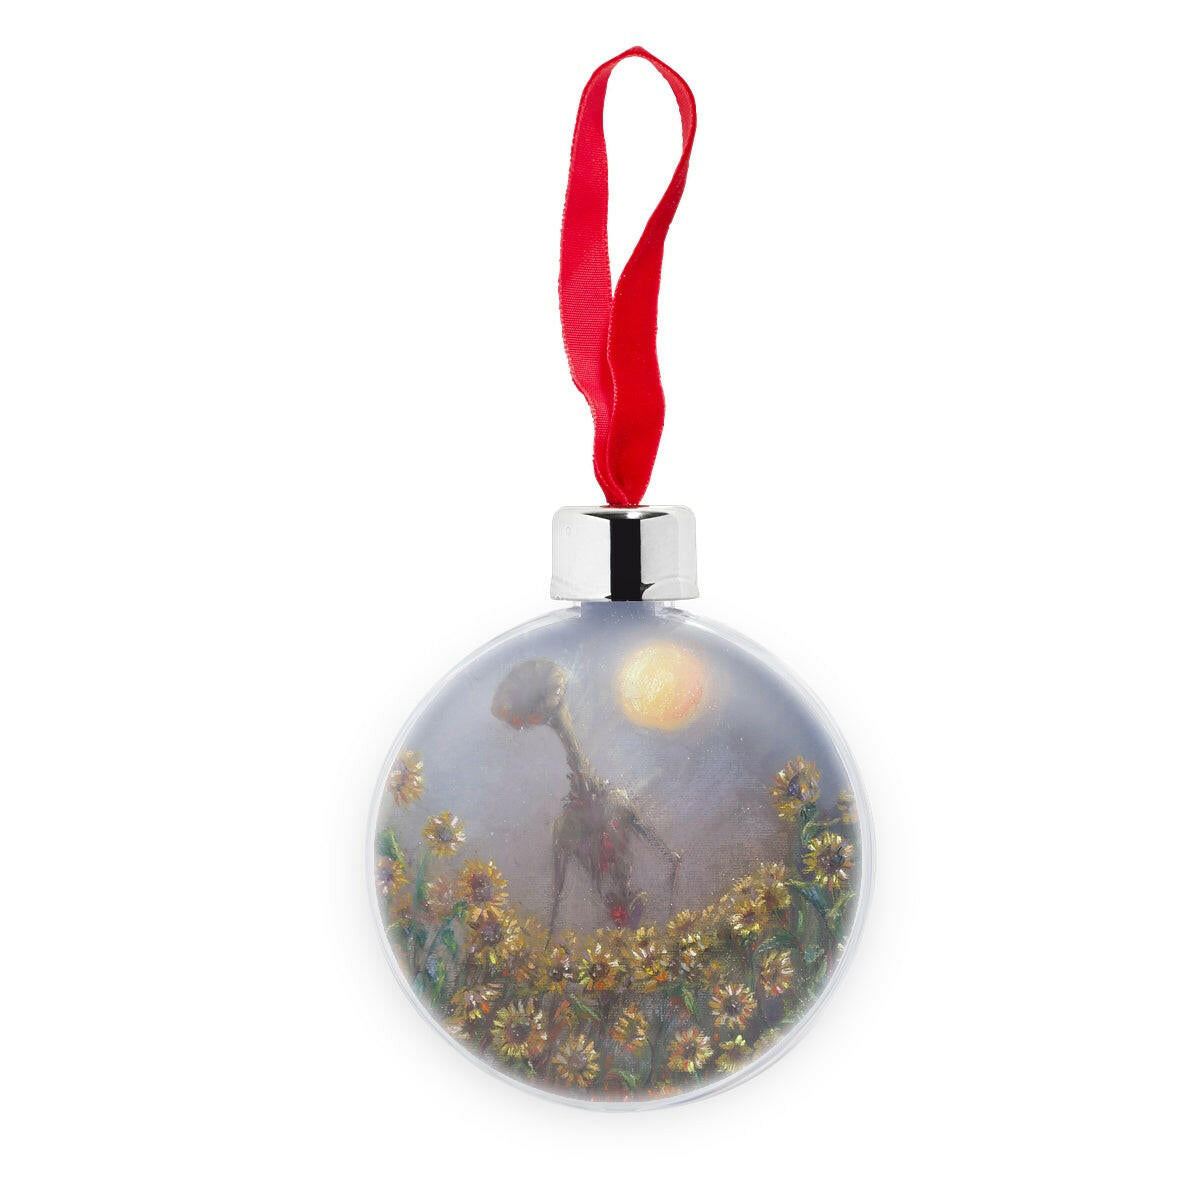 A song of terror Transparent Christmas bauble.